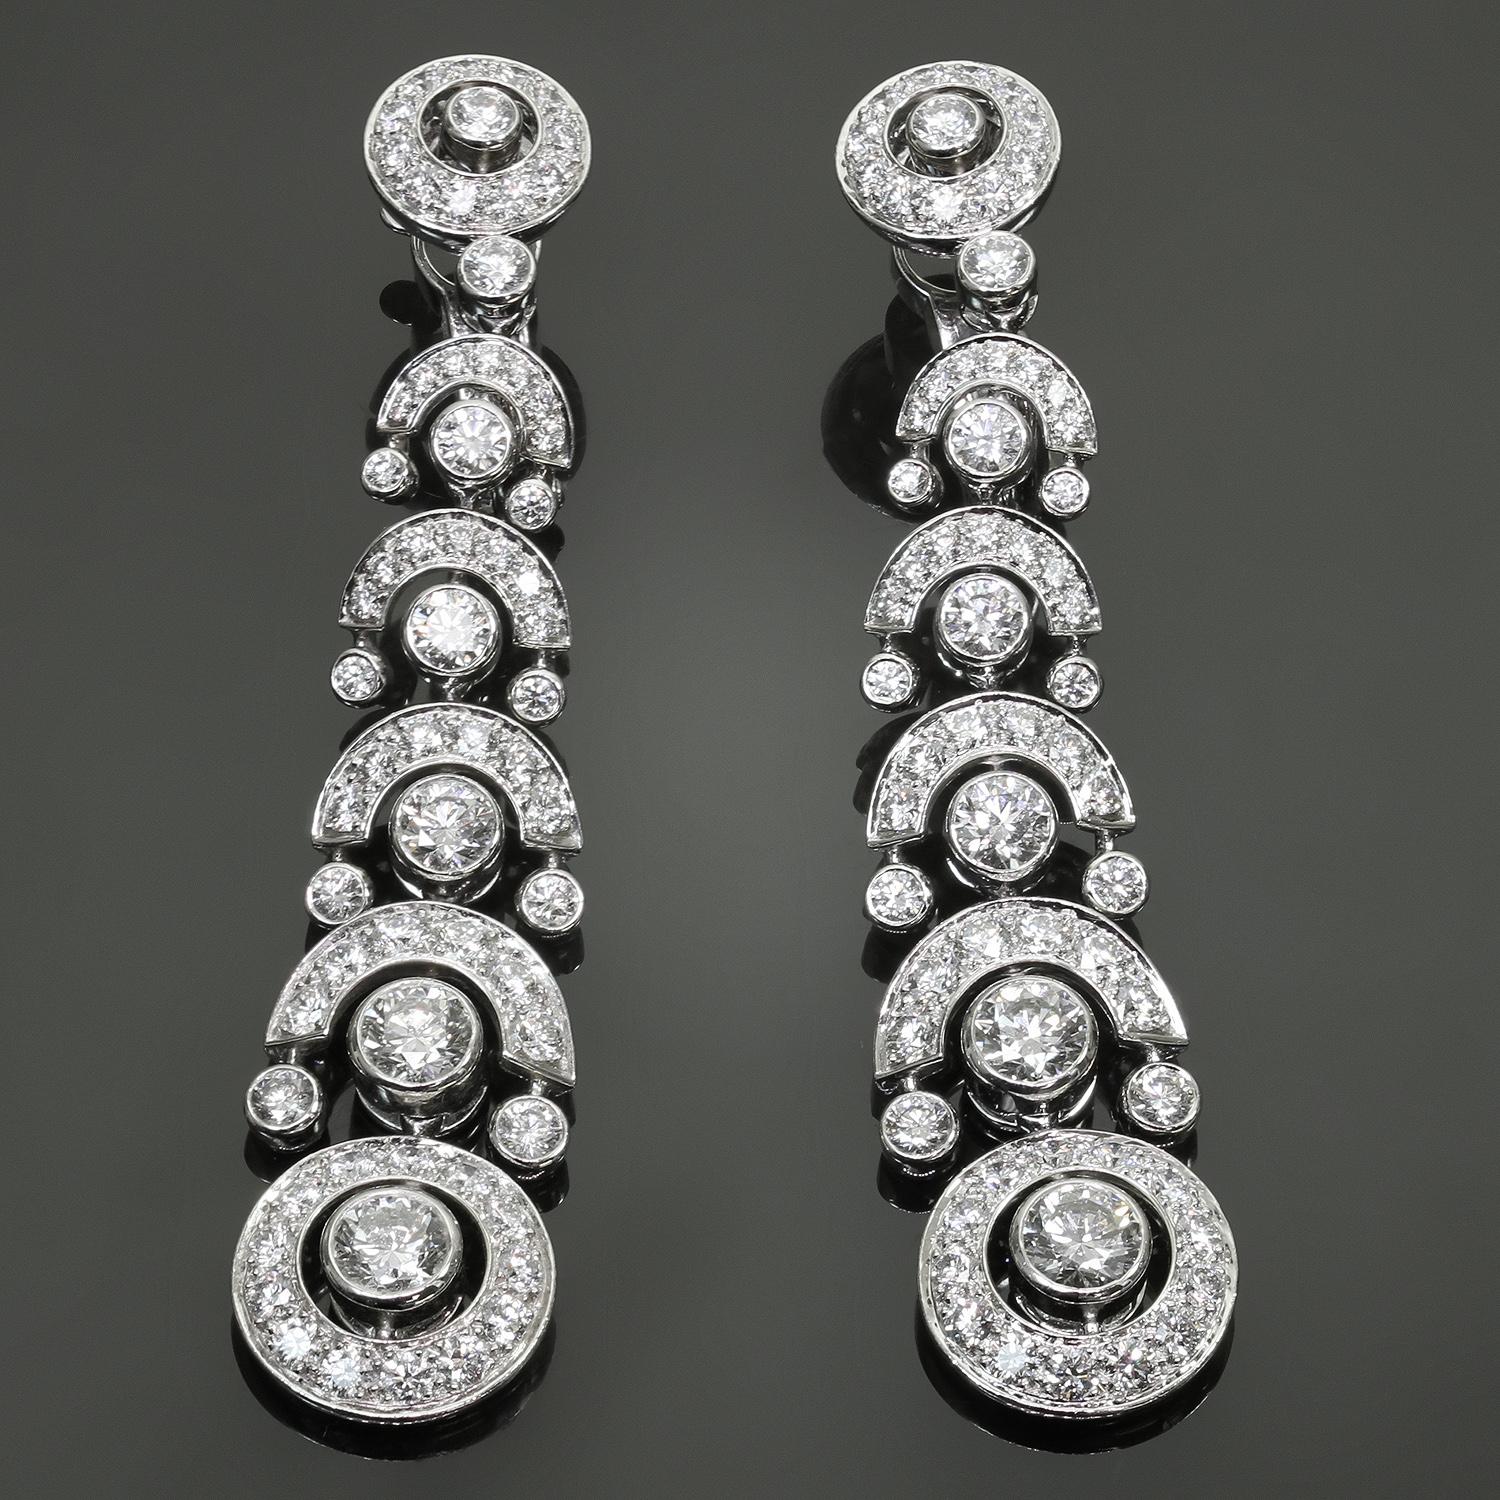 These magnificent modern authentic Cartier chandelier earrings are crafted in platinum and set with round brilliant D-E-F VVS1-VVS2 diamonds weighing an estimated 4.80 - 5.0 carats. Made in France circa 2021. Measurements: 0.43